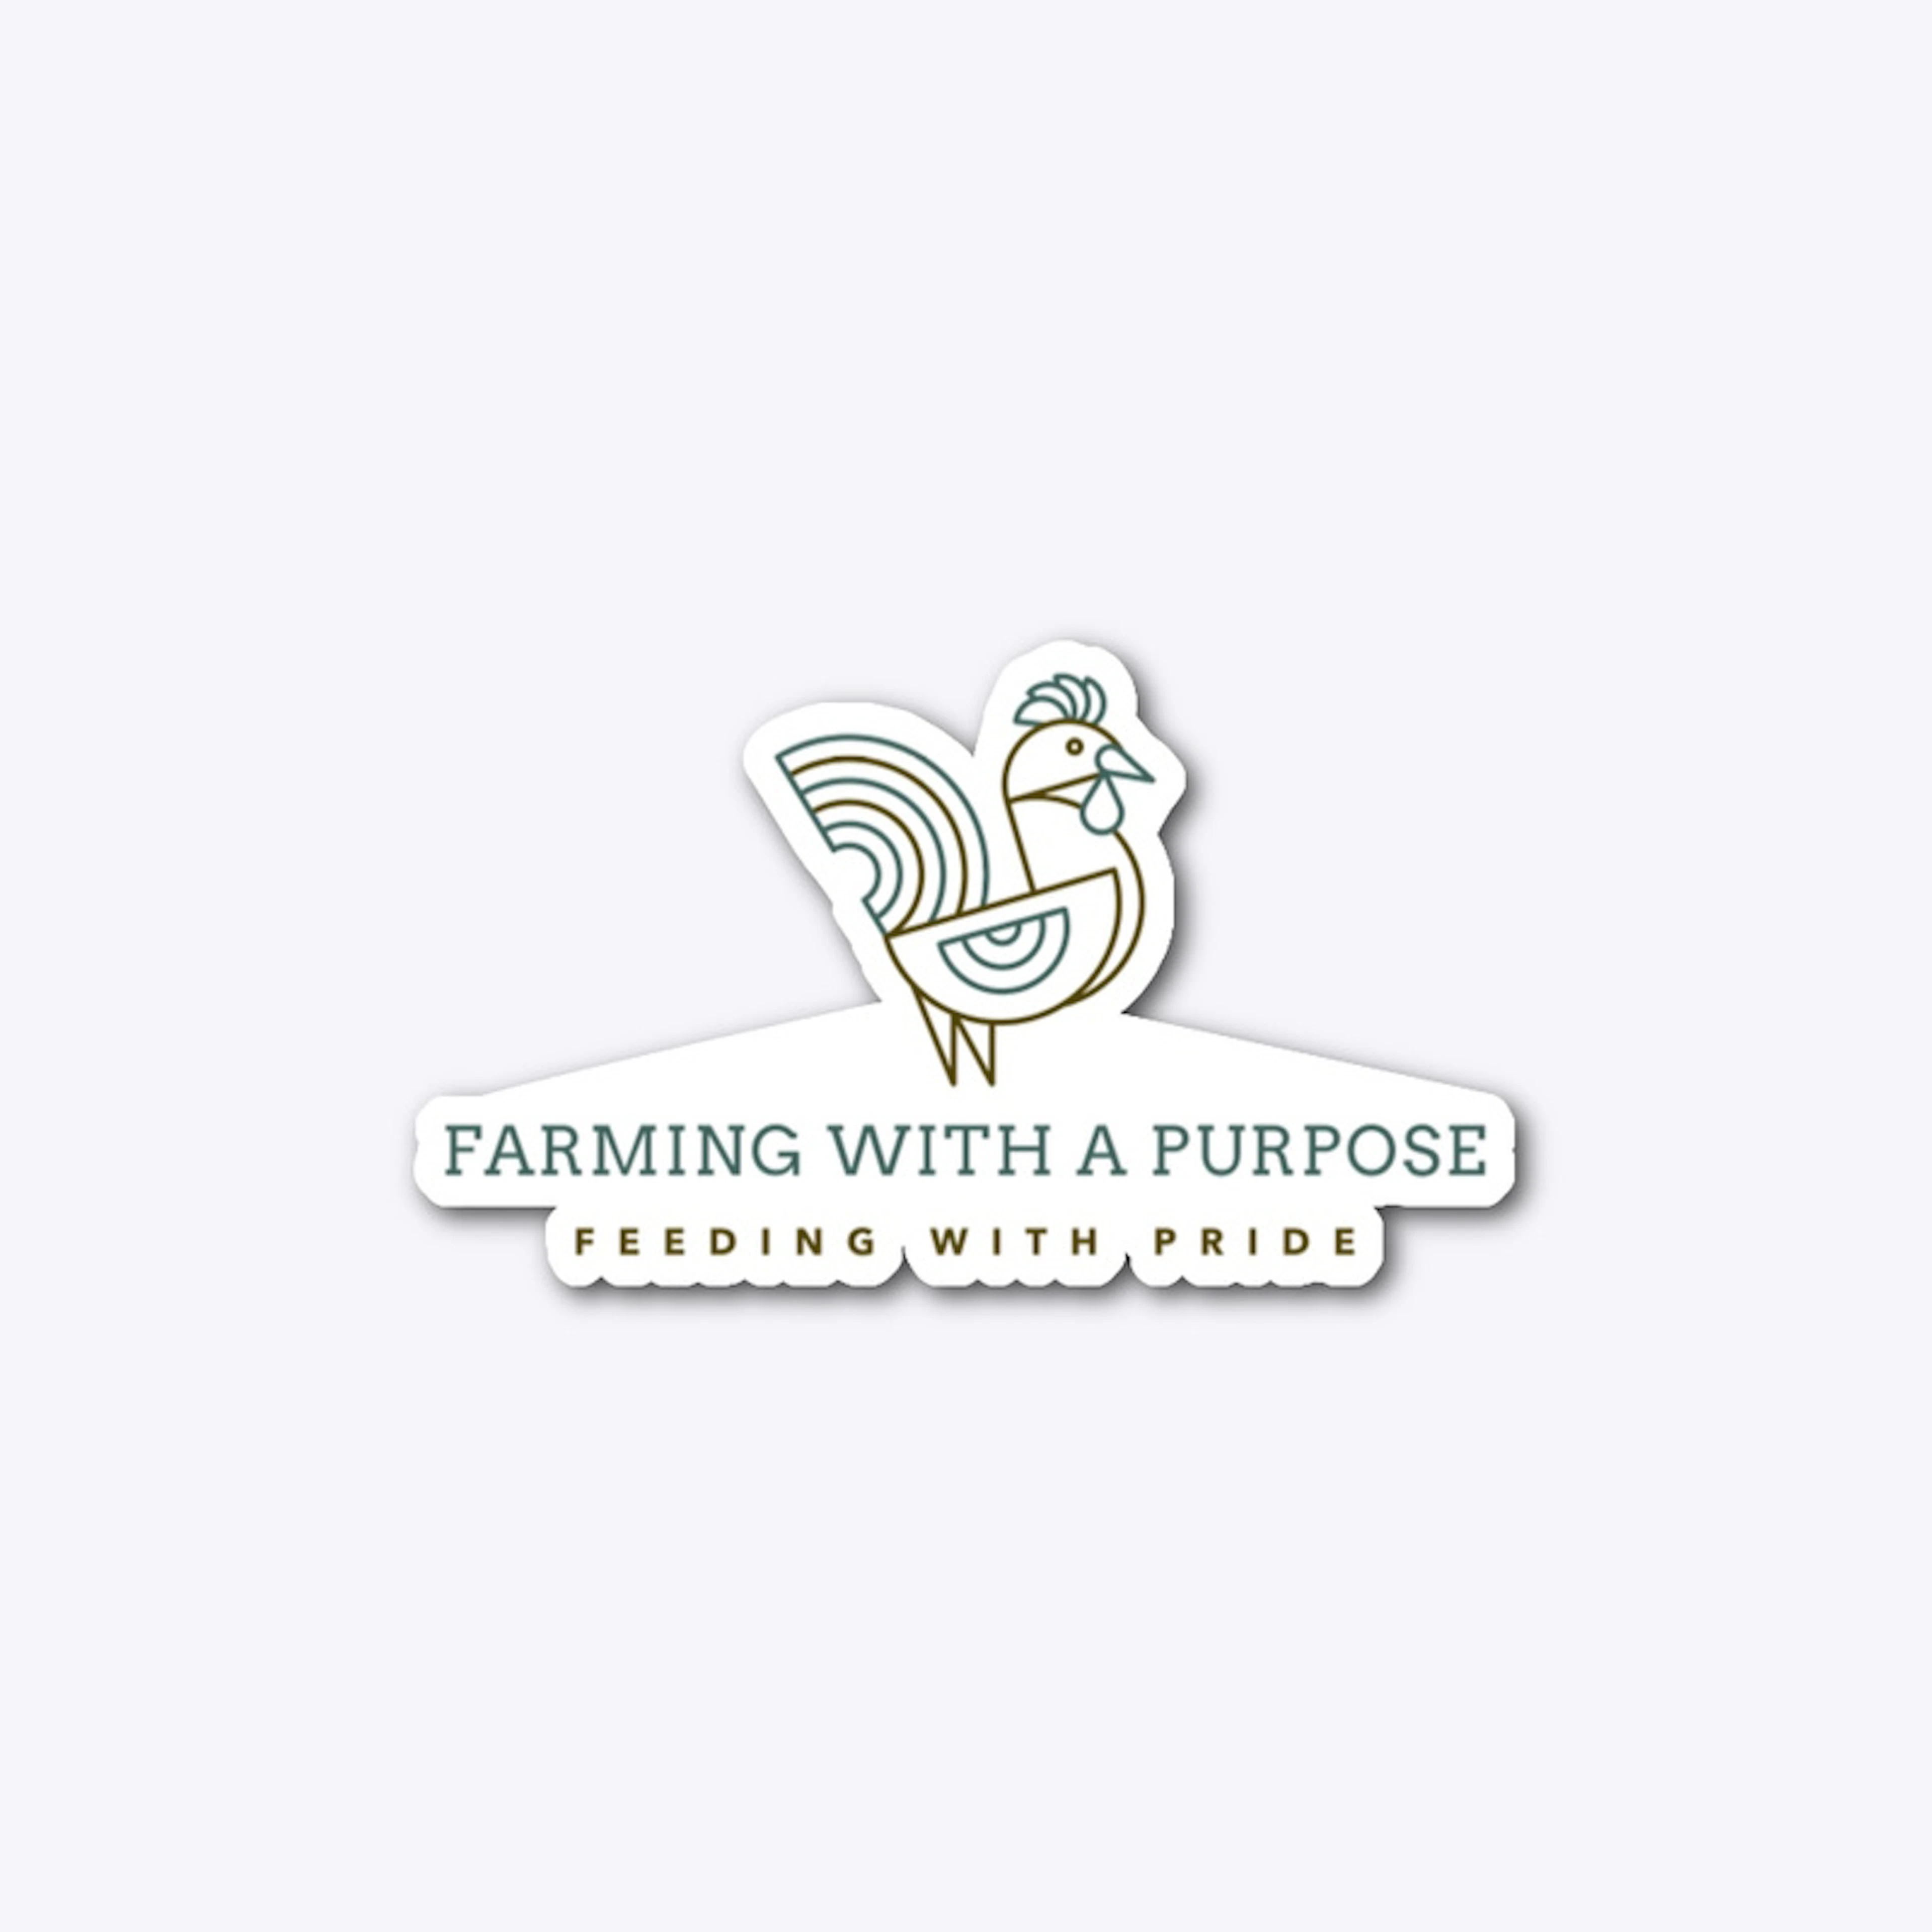 Farming with a purpose 